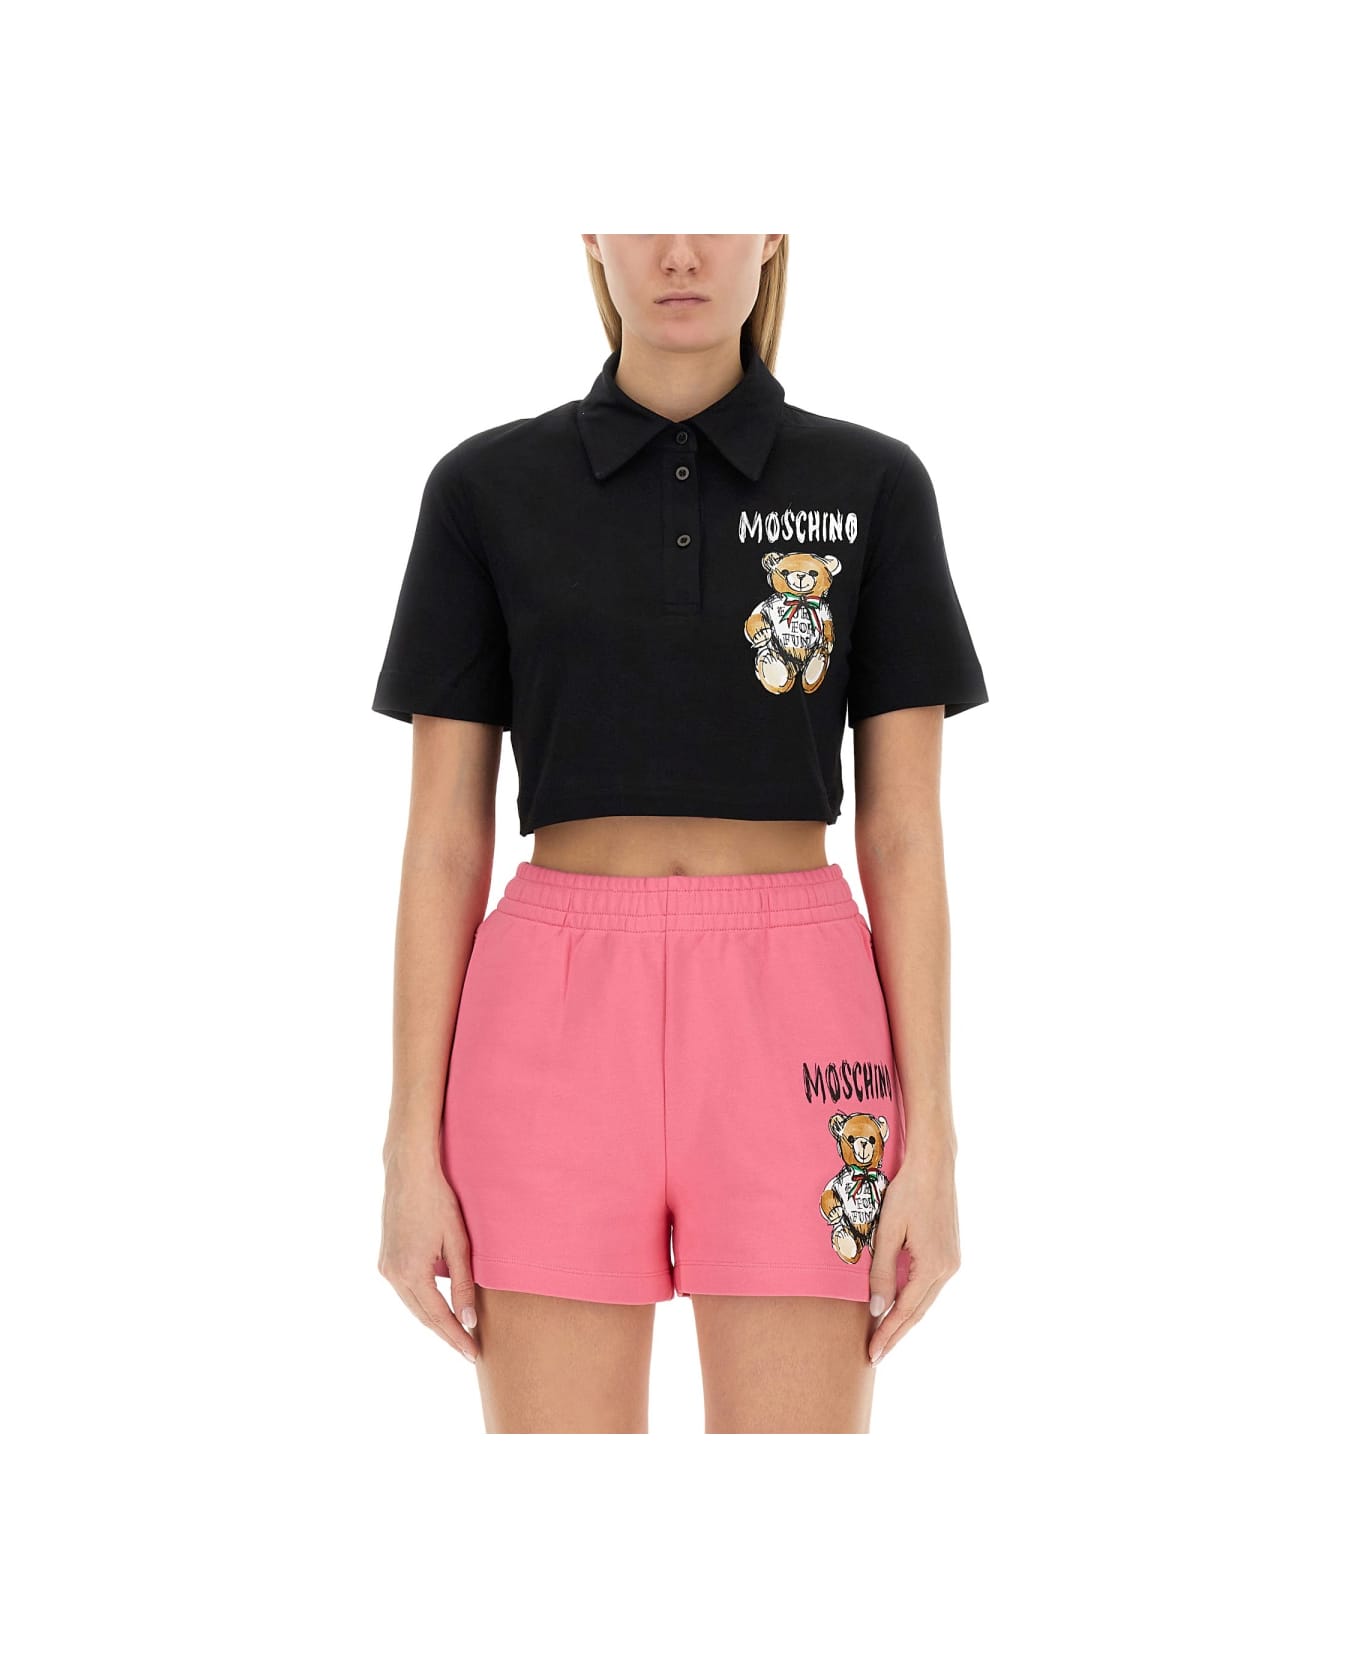 Moschino Cropped Fit Polo Shirt - BLACK